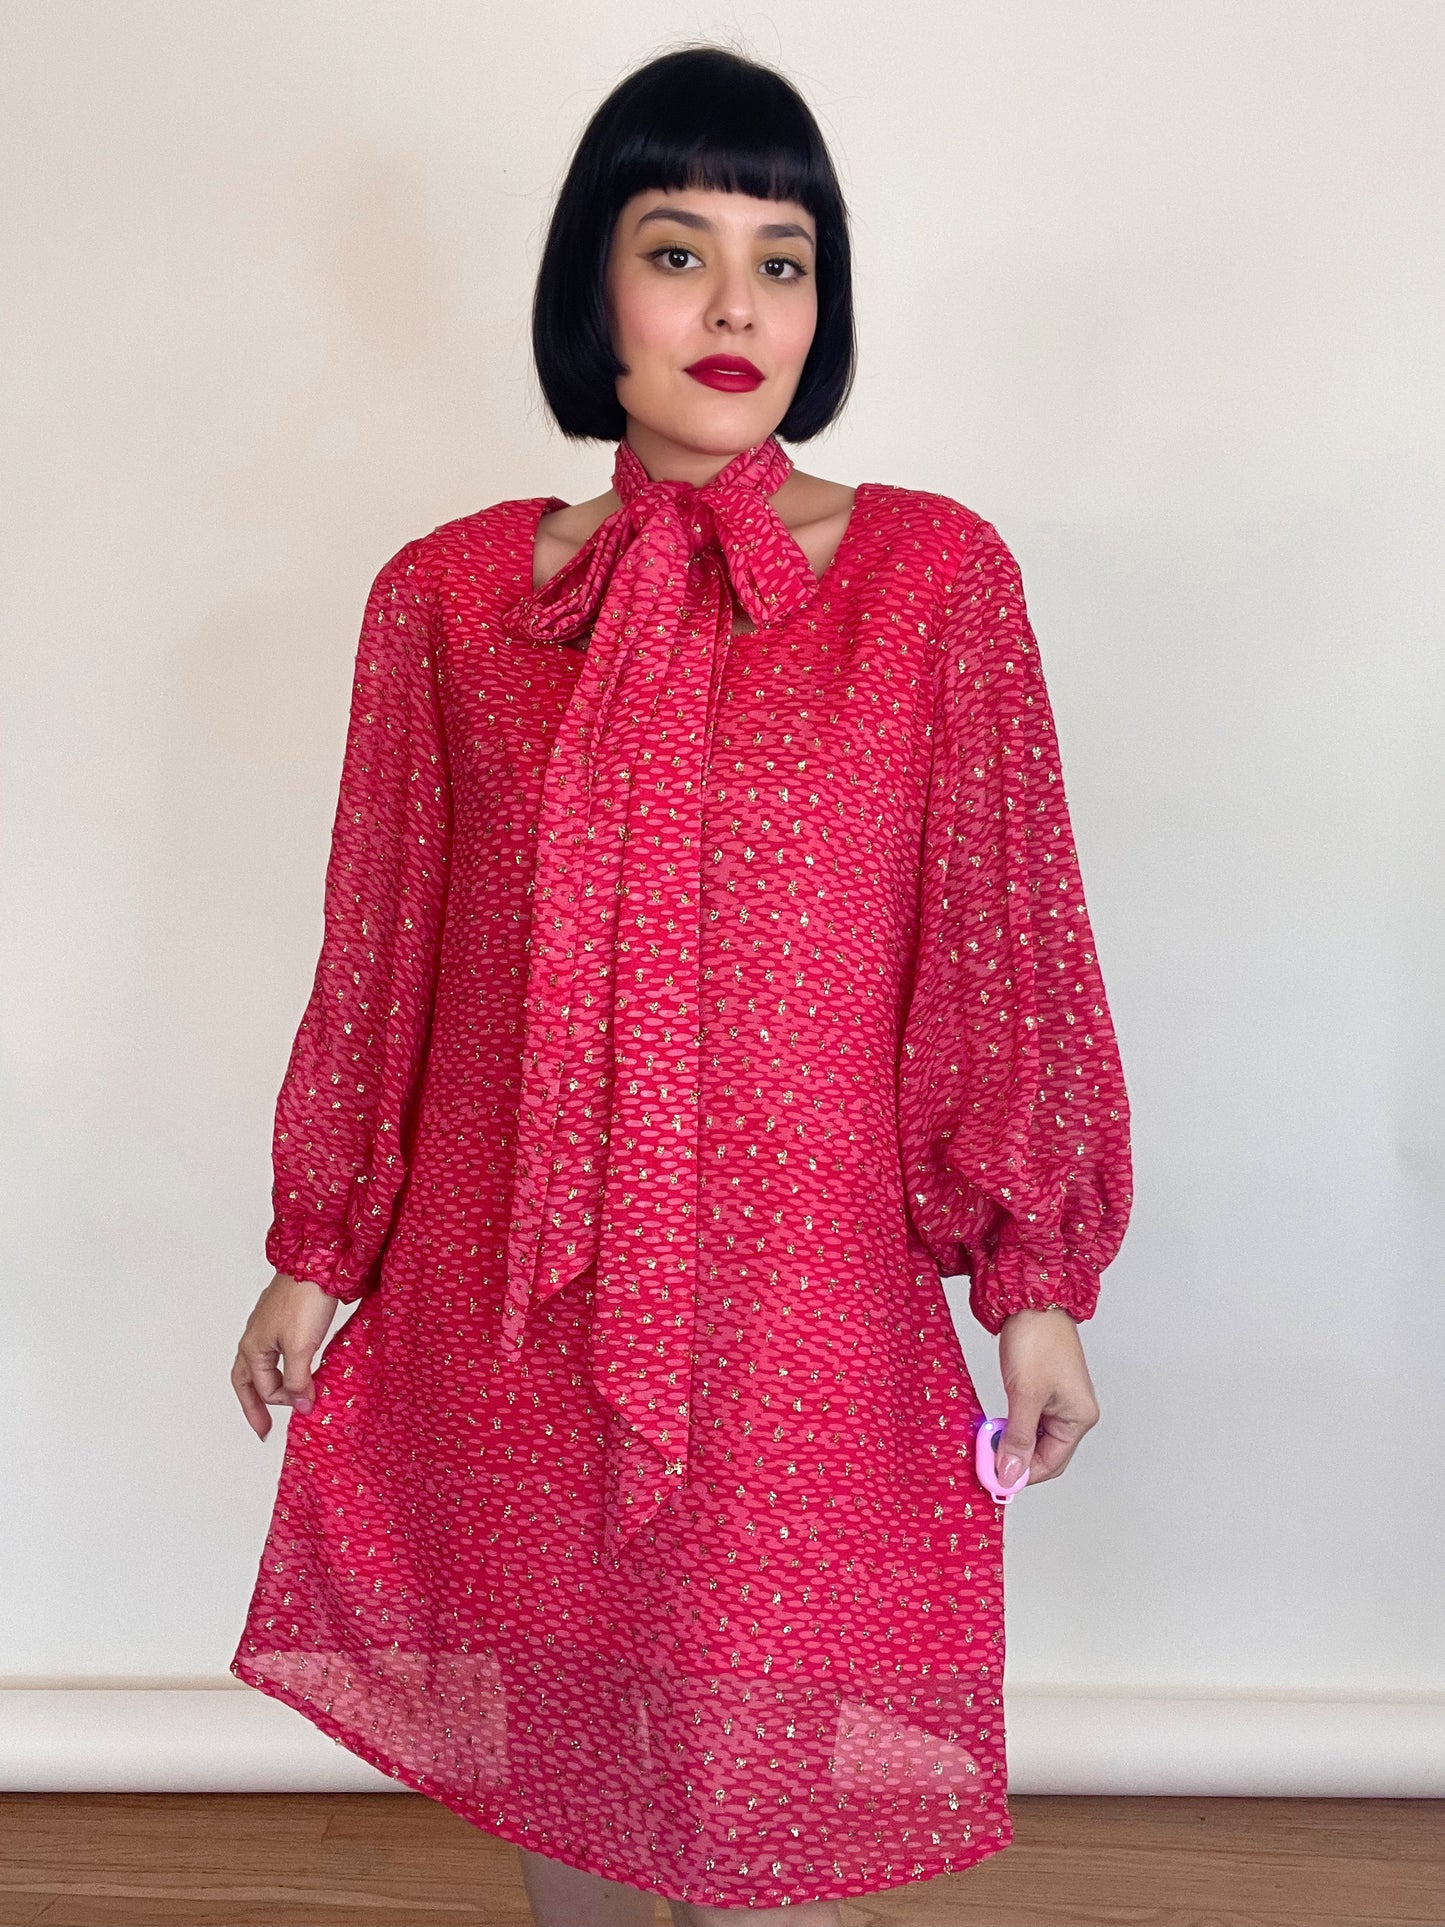 Vintage 60s "Patricia's Santa Ana" Dark Pink/ Red and Gold Long Sleeve Shift Dress Best Fits Sizes S-M